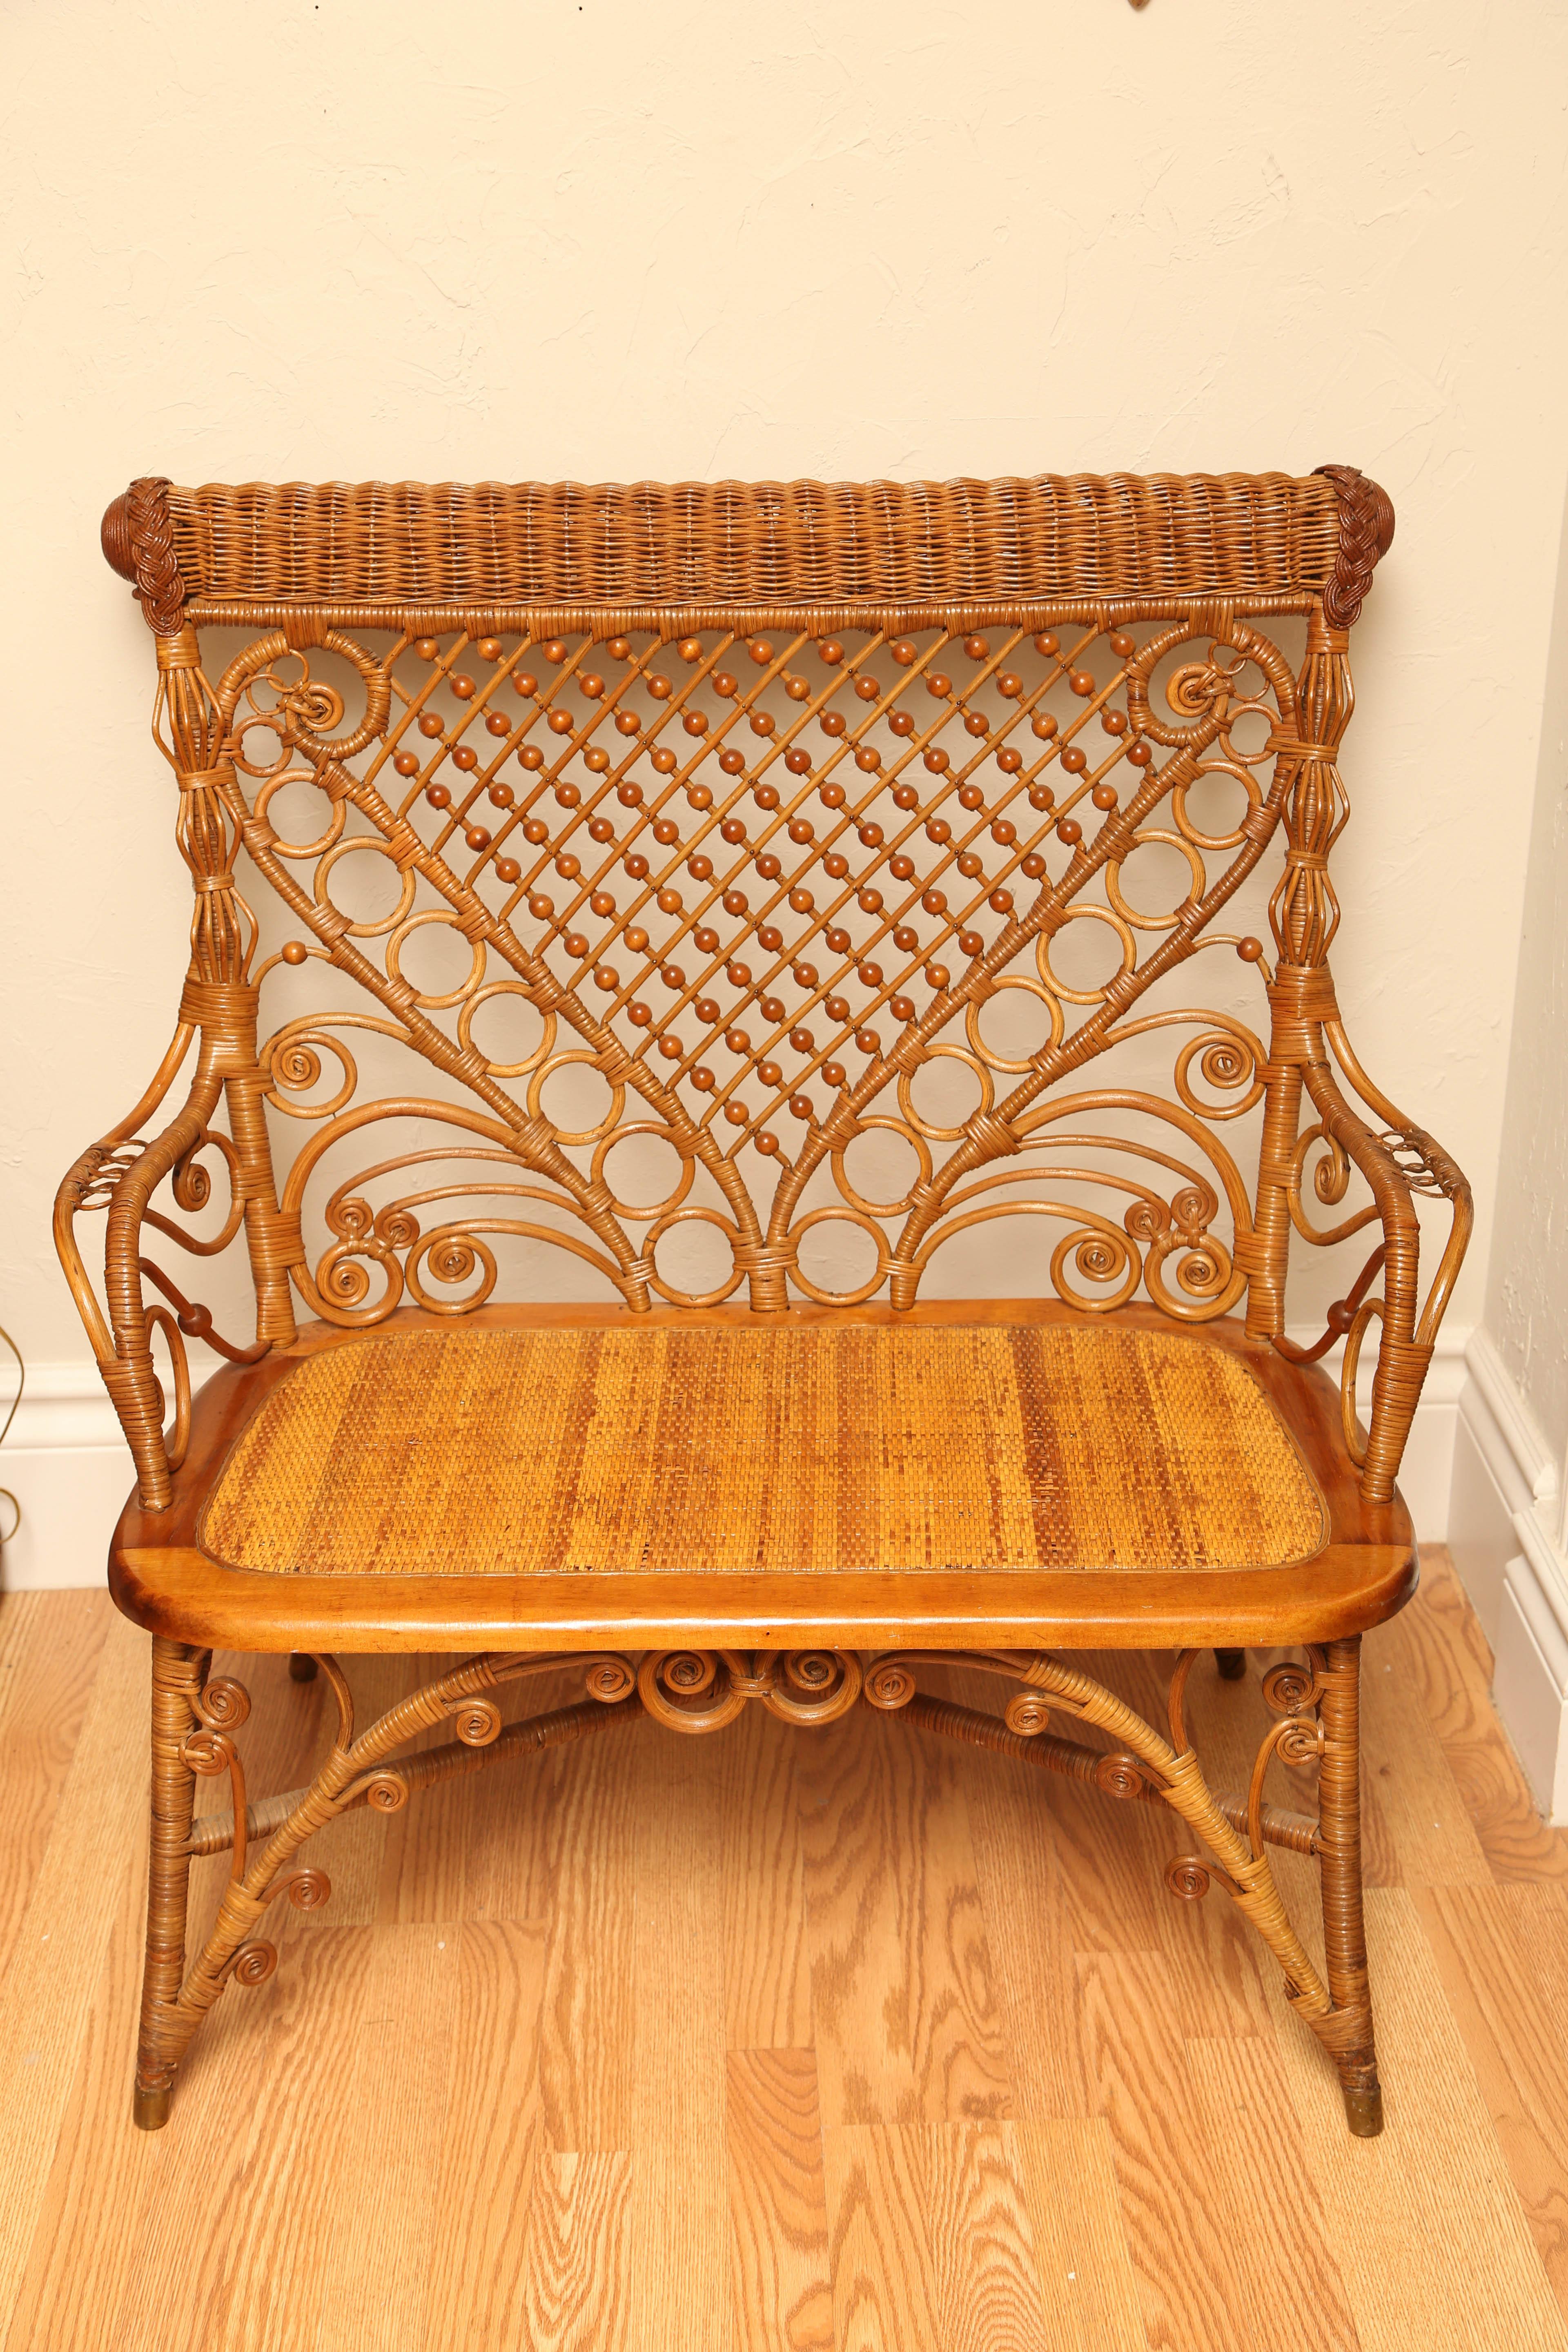 Charming antique wicker settee with a set in cane seat and ornate back and arms.